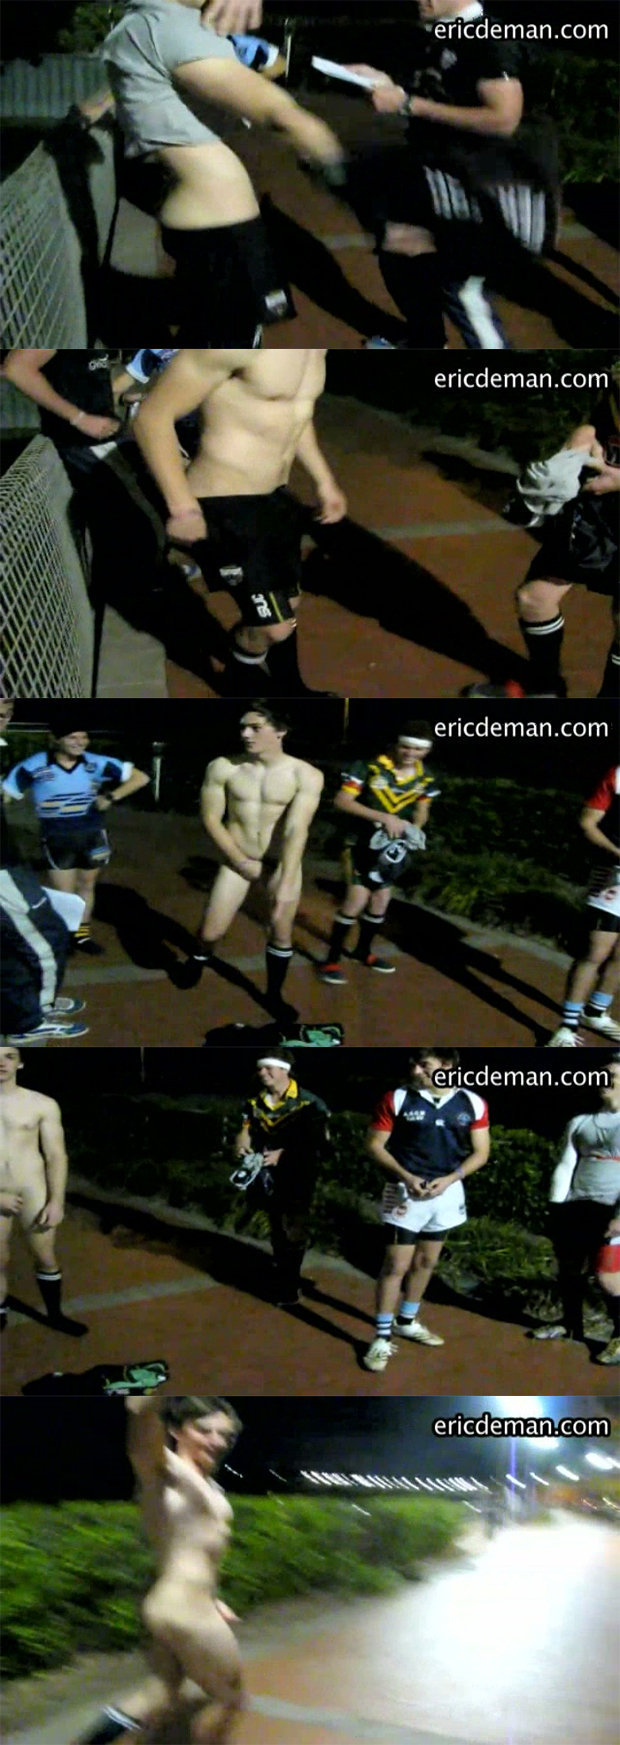 naked ruggers